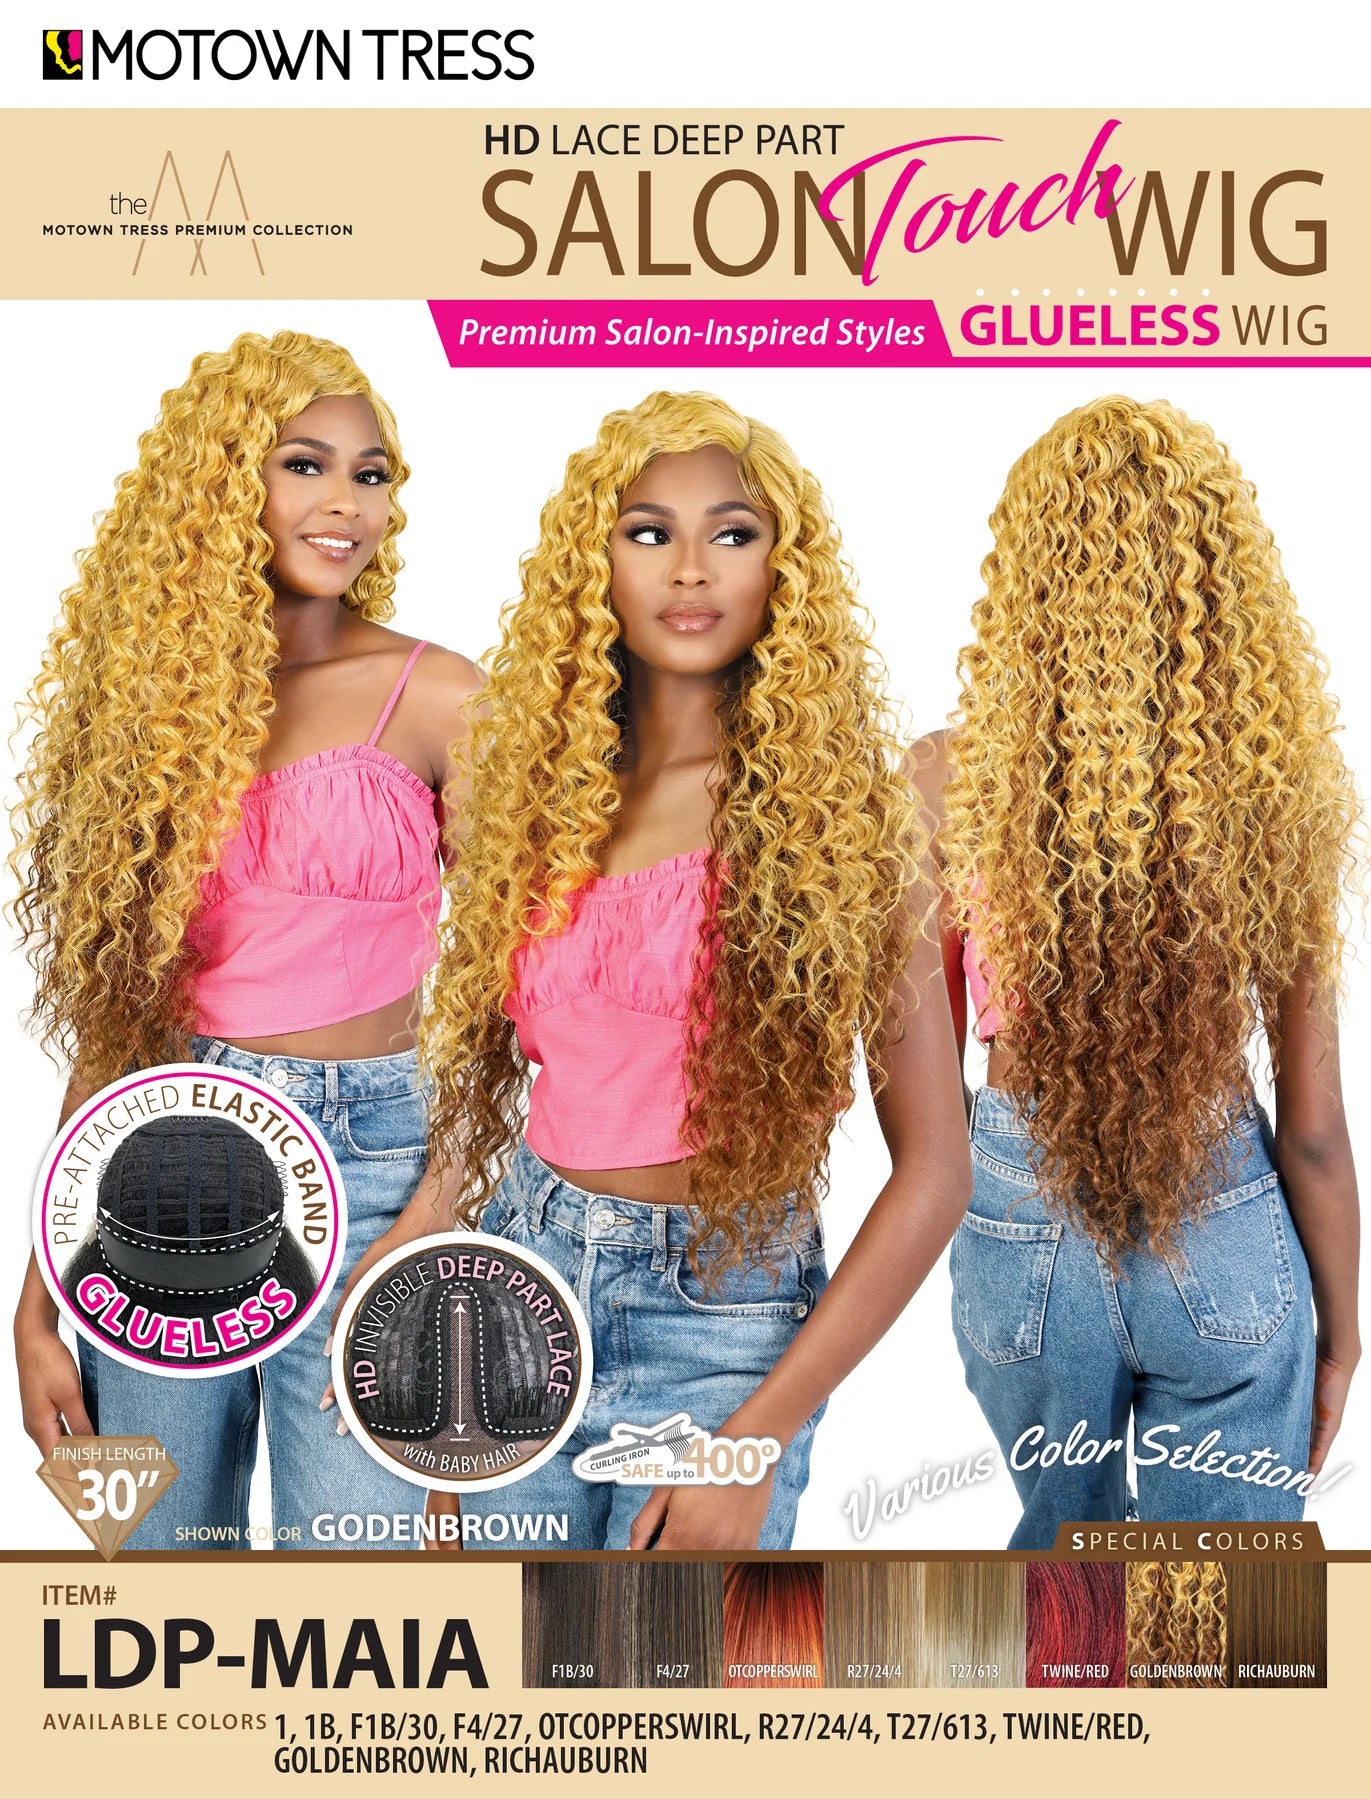 Motown Tress Salon Touch Wig Glueless Synthetic HD Lace Part Wig LDP-MAIA